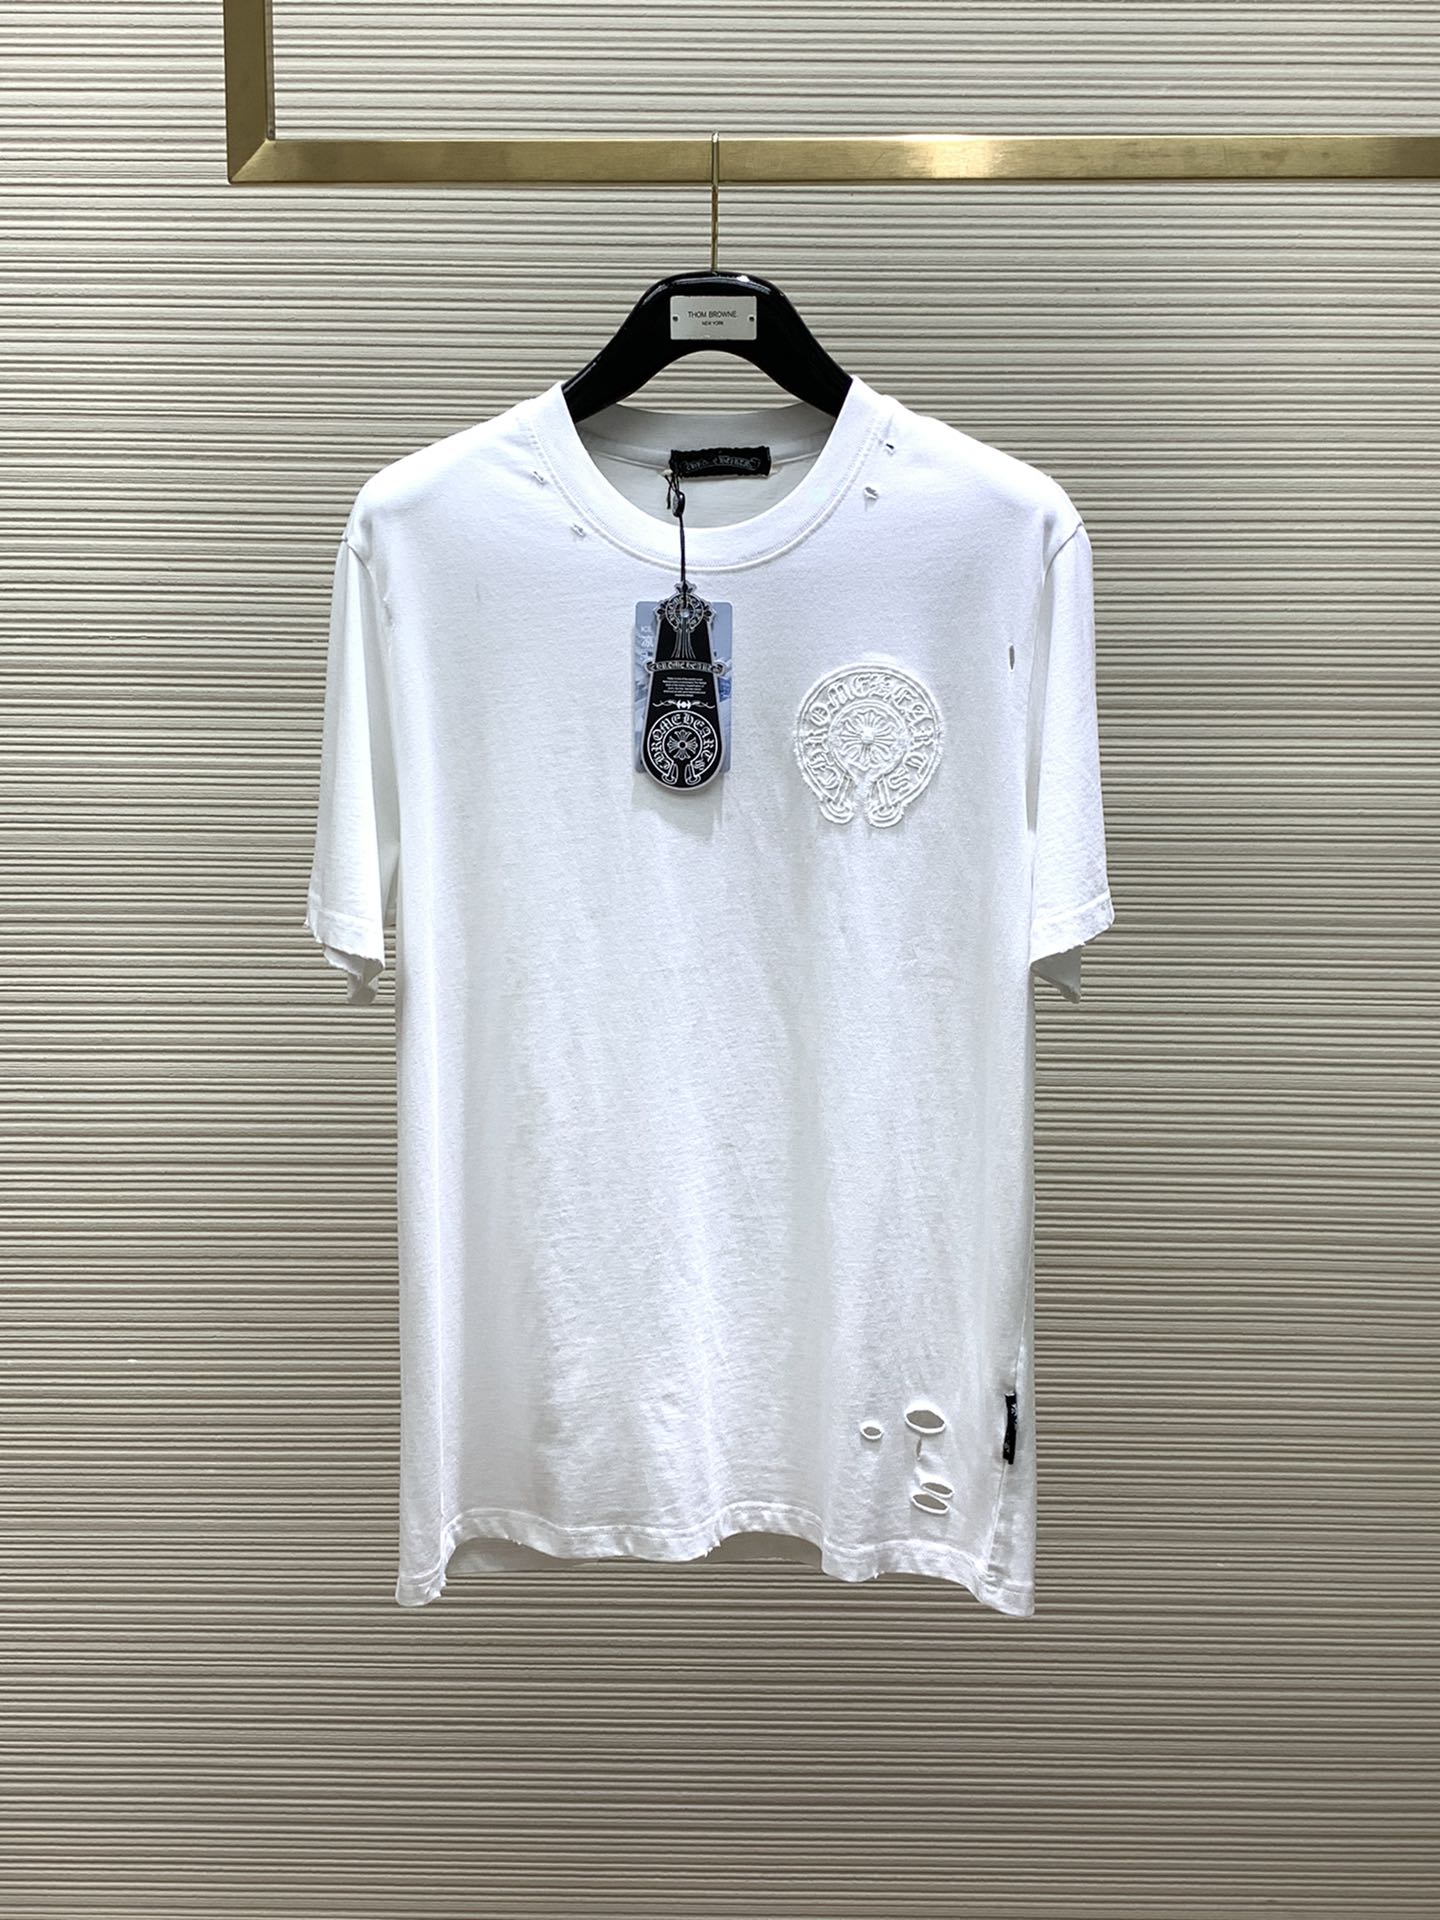 Chrome Hearts Clothing T-Shirt Embroidery Summer Collection Fashion Short Sleeve